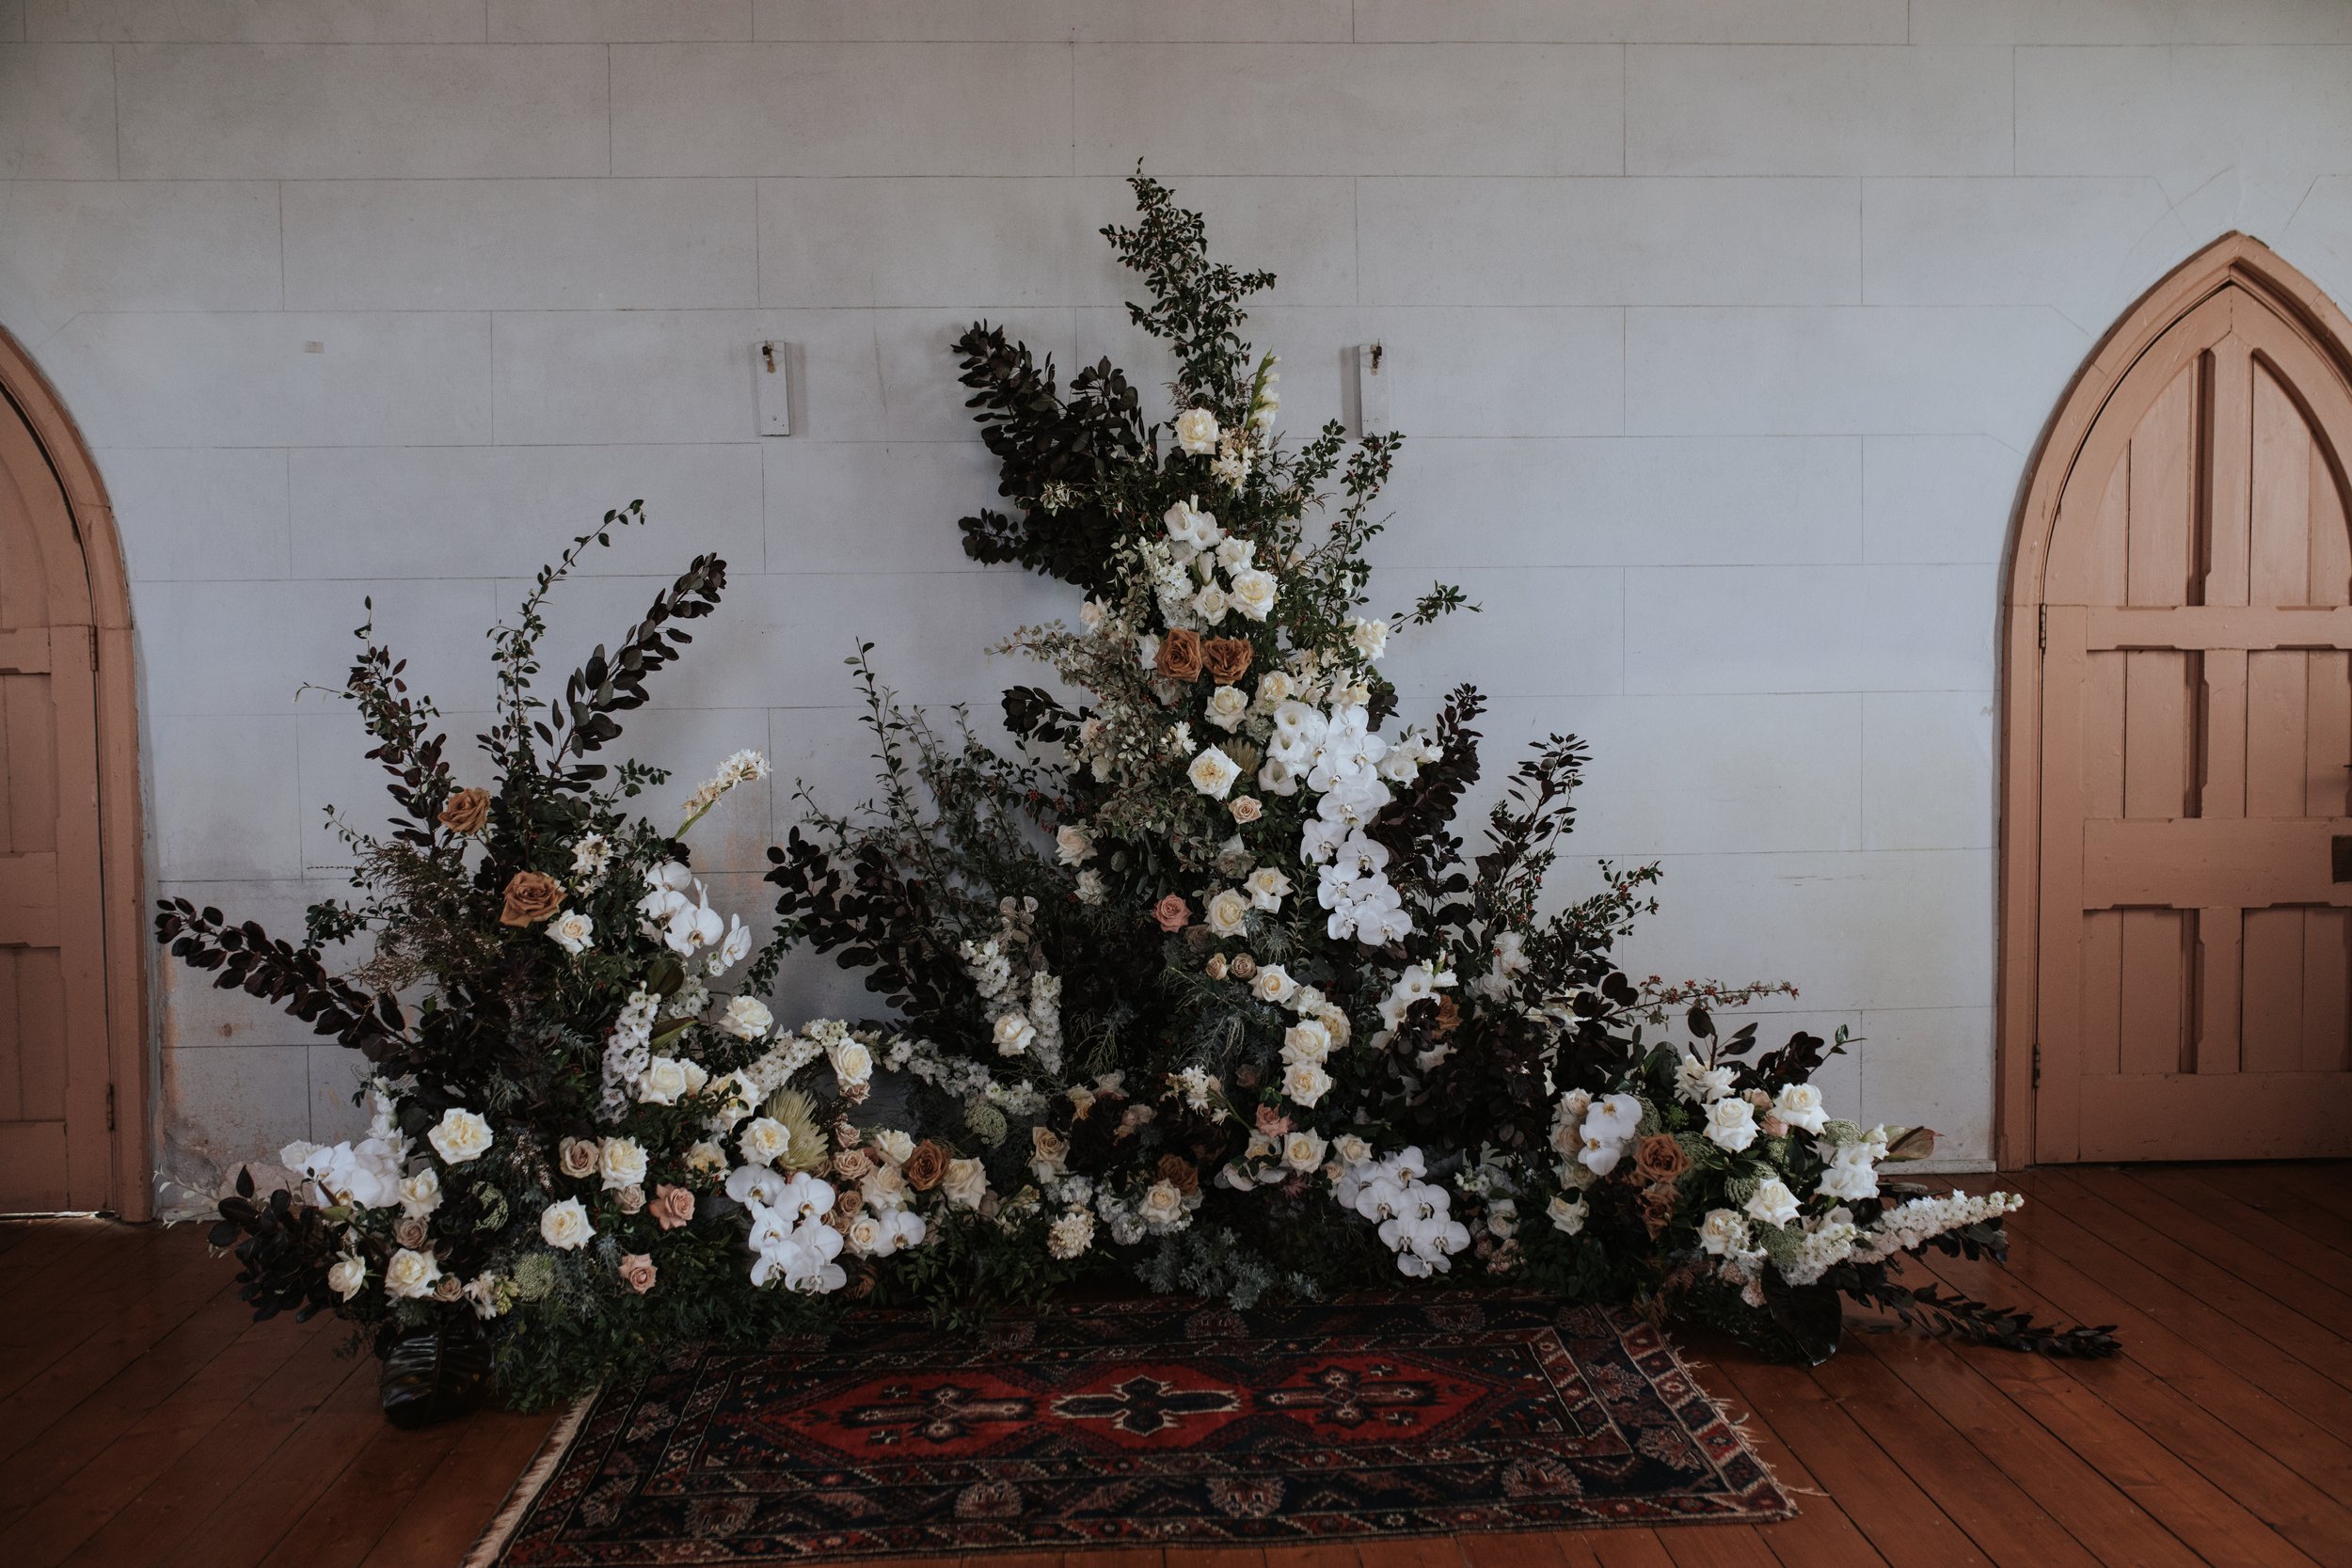 Floral Installation by Judah Rose at a wedding held at a private property 